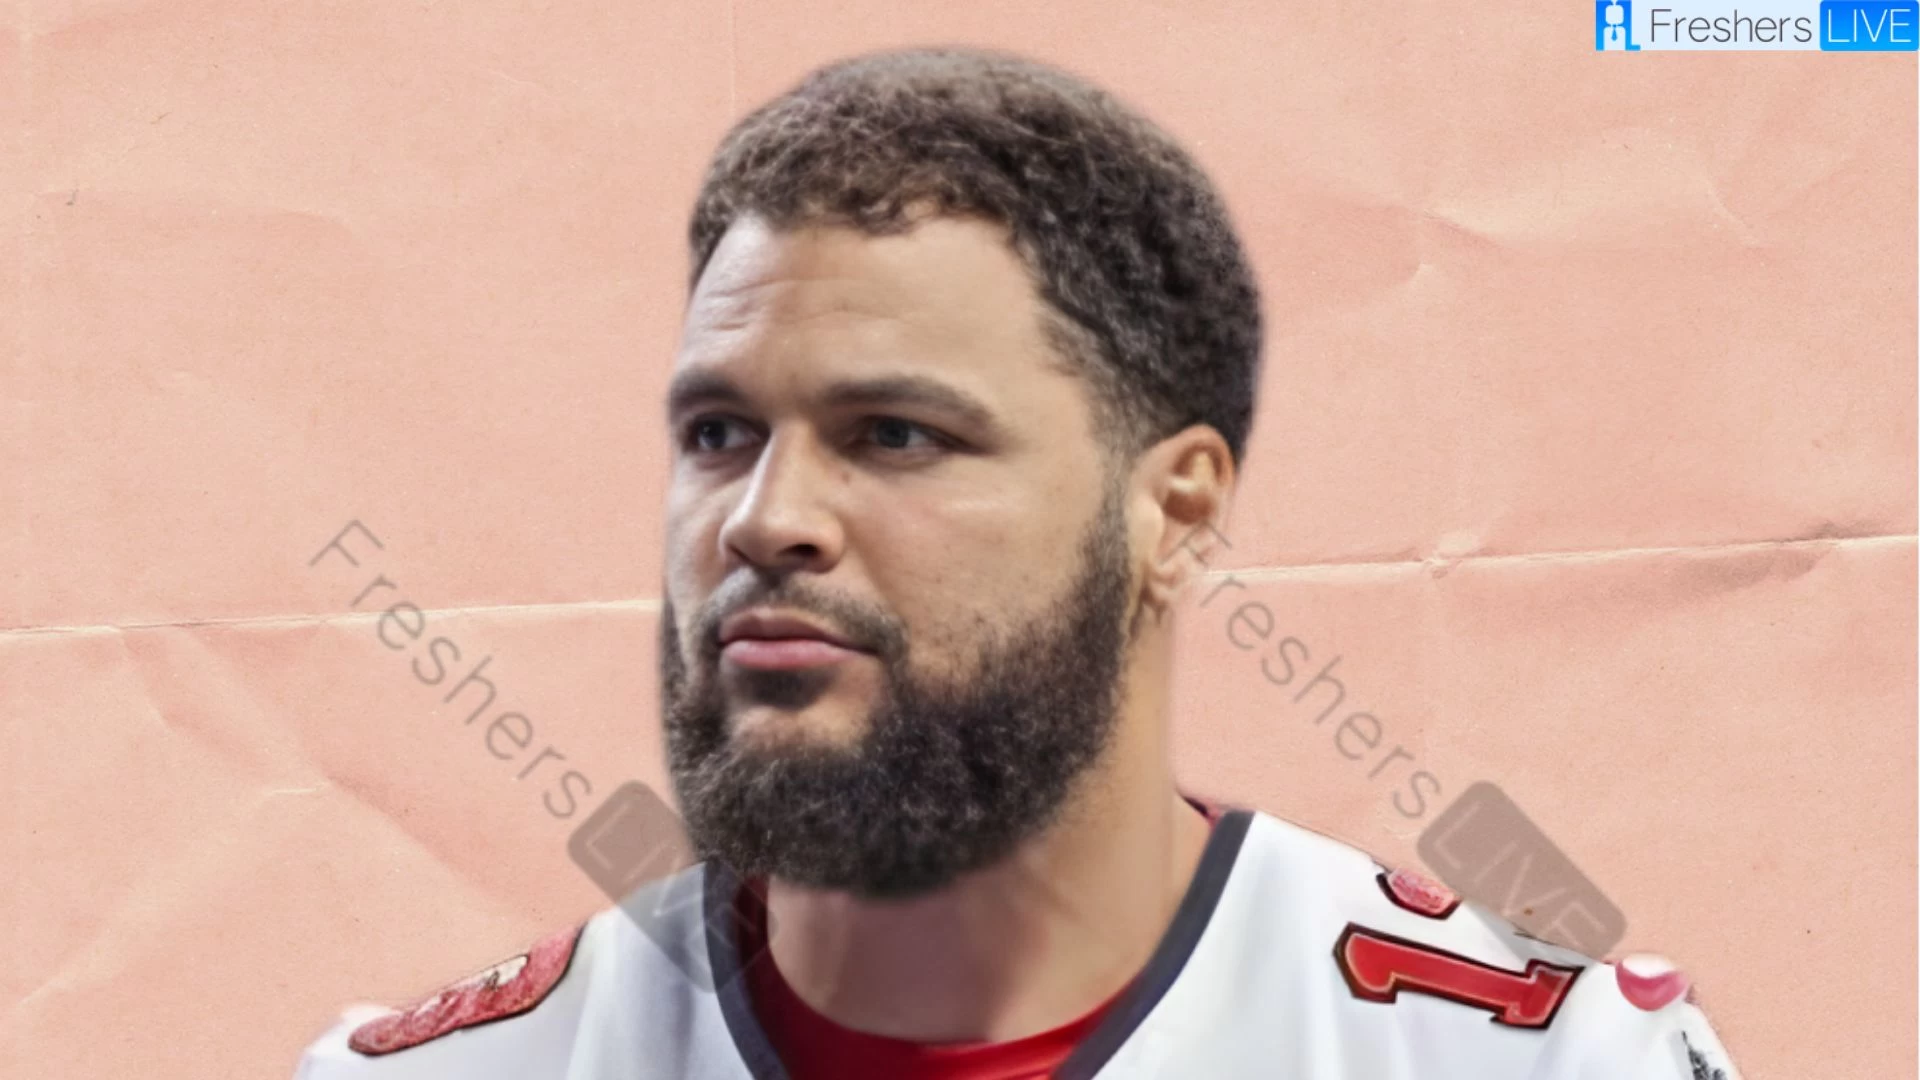 Mike Evans Religion What Religion is Mike Evans? Is Mike Evans a Christianity?